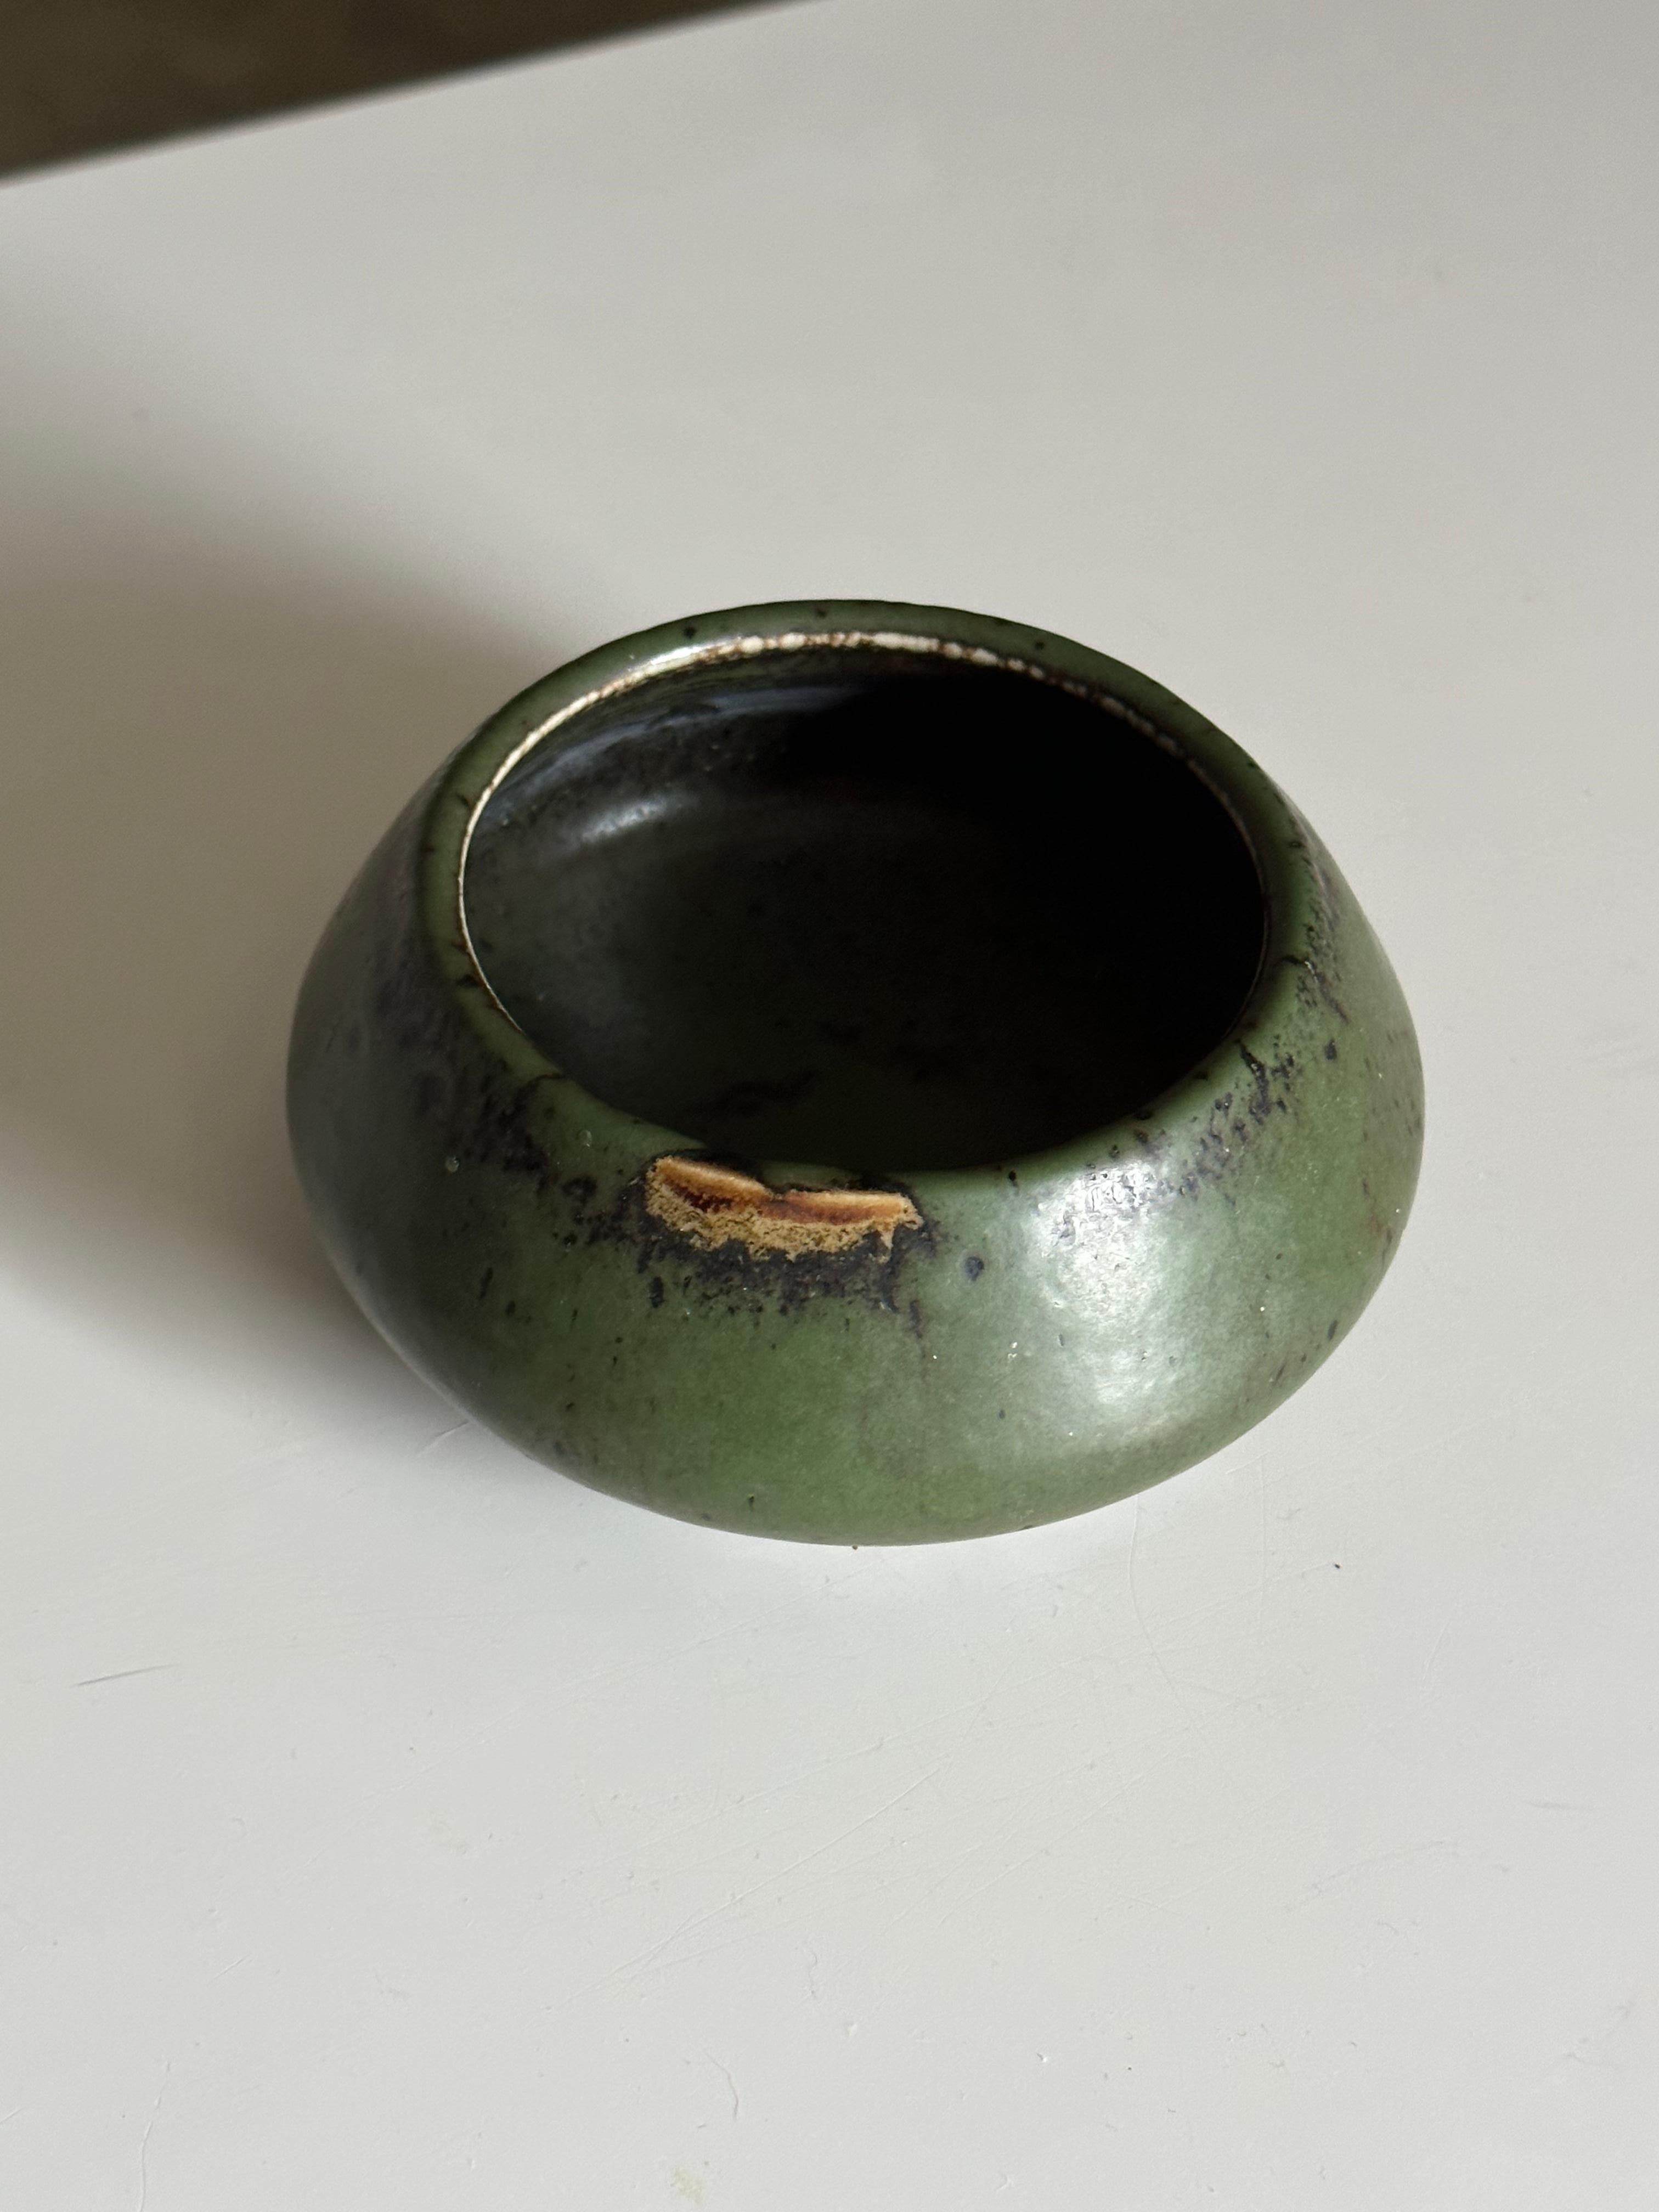 An unusual low vase or decorative bowl designed by Carl Harry Stålhane for Rörstrand. A wonderful predominately green glaze with areas of other colors showing through. A wonderful piece that would work in a variety of interiors.